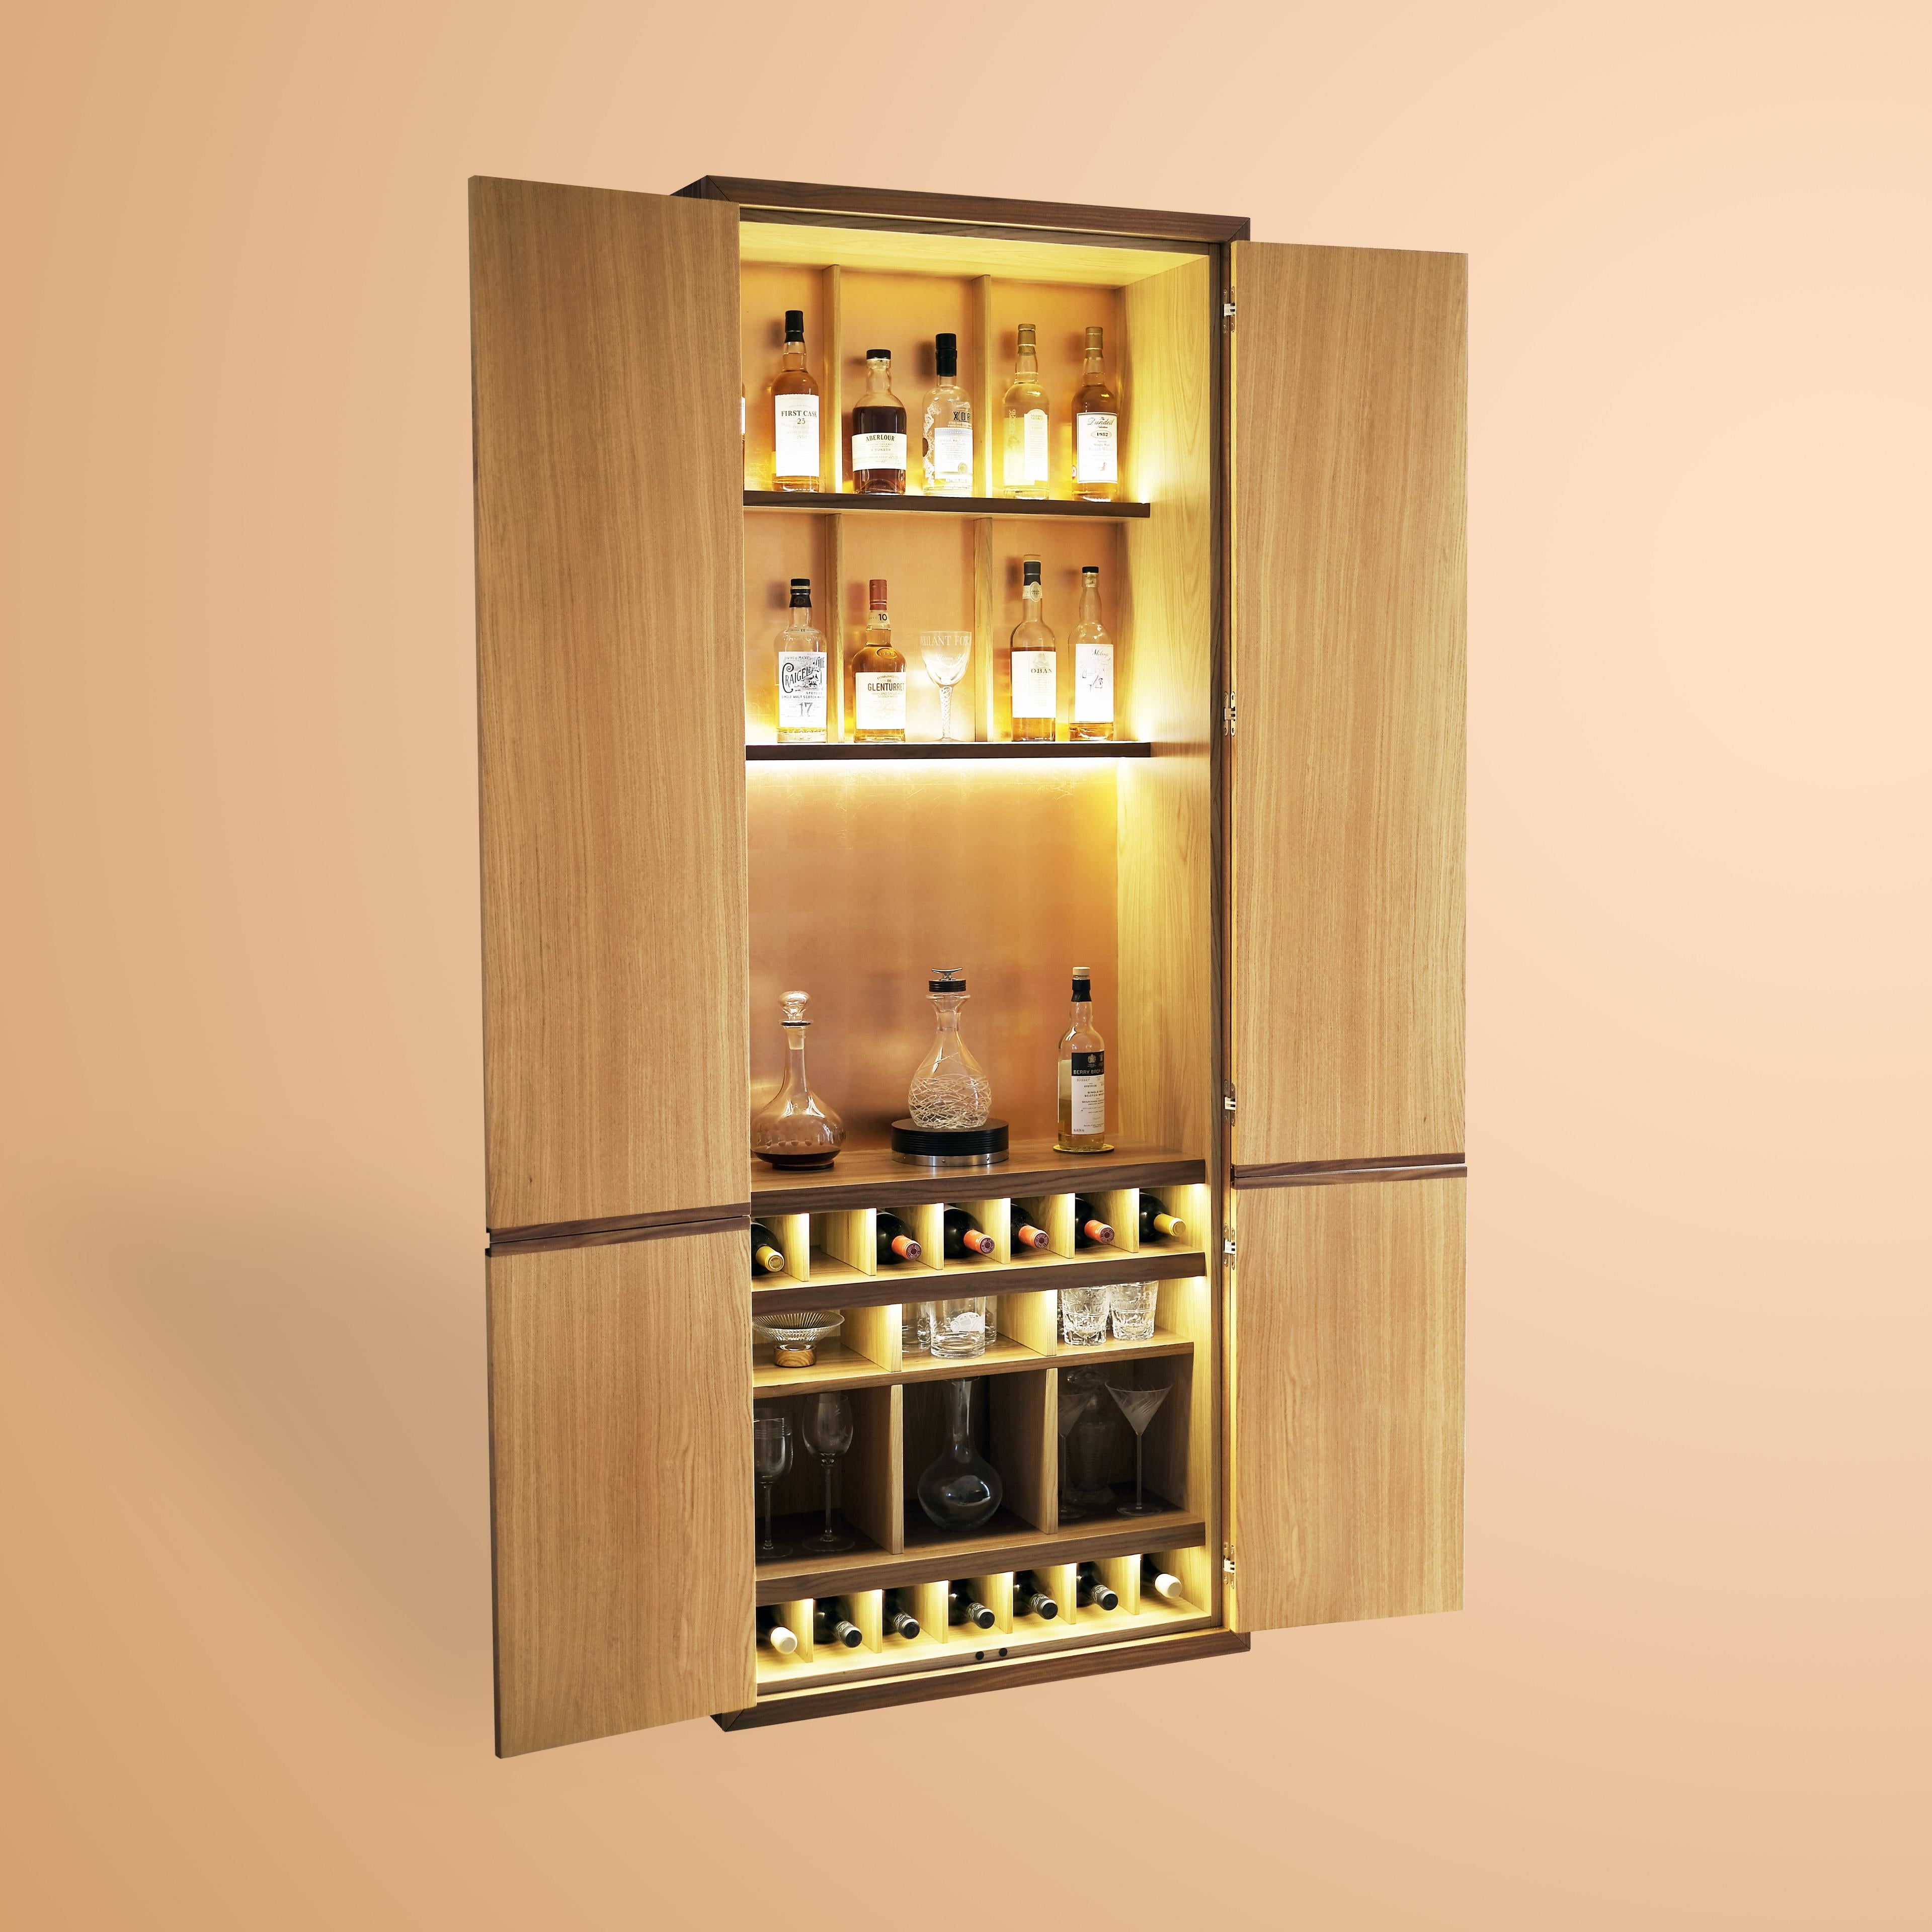 Four doors drinks cabinet with antique mirror on the top and burr oak at the bottom.
Interior in oak veneer, walnut details and copper leaf at the back.

As with all our furniture, this drinks cabinet is made to order and is therefore highly